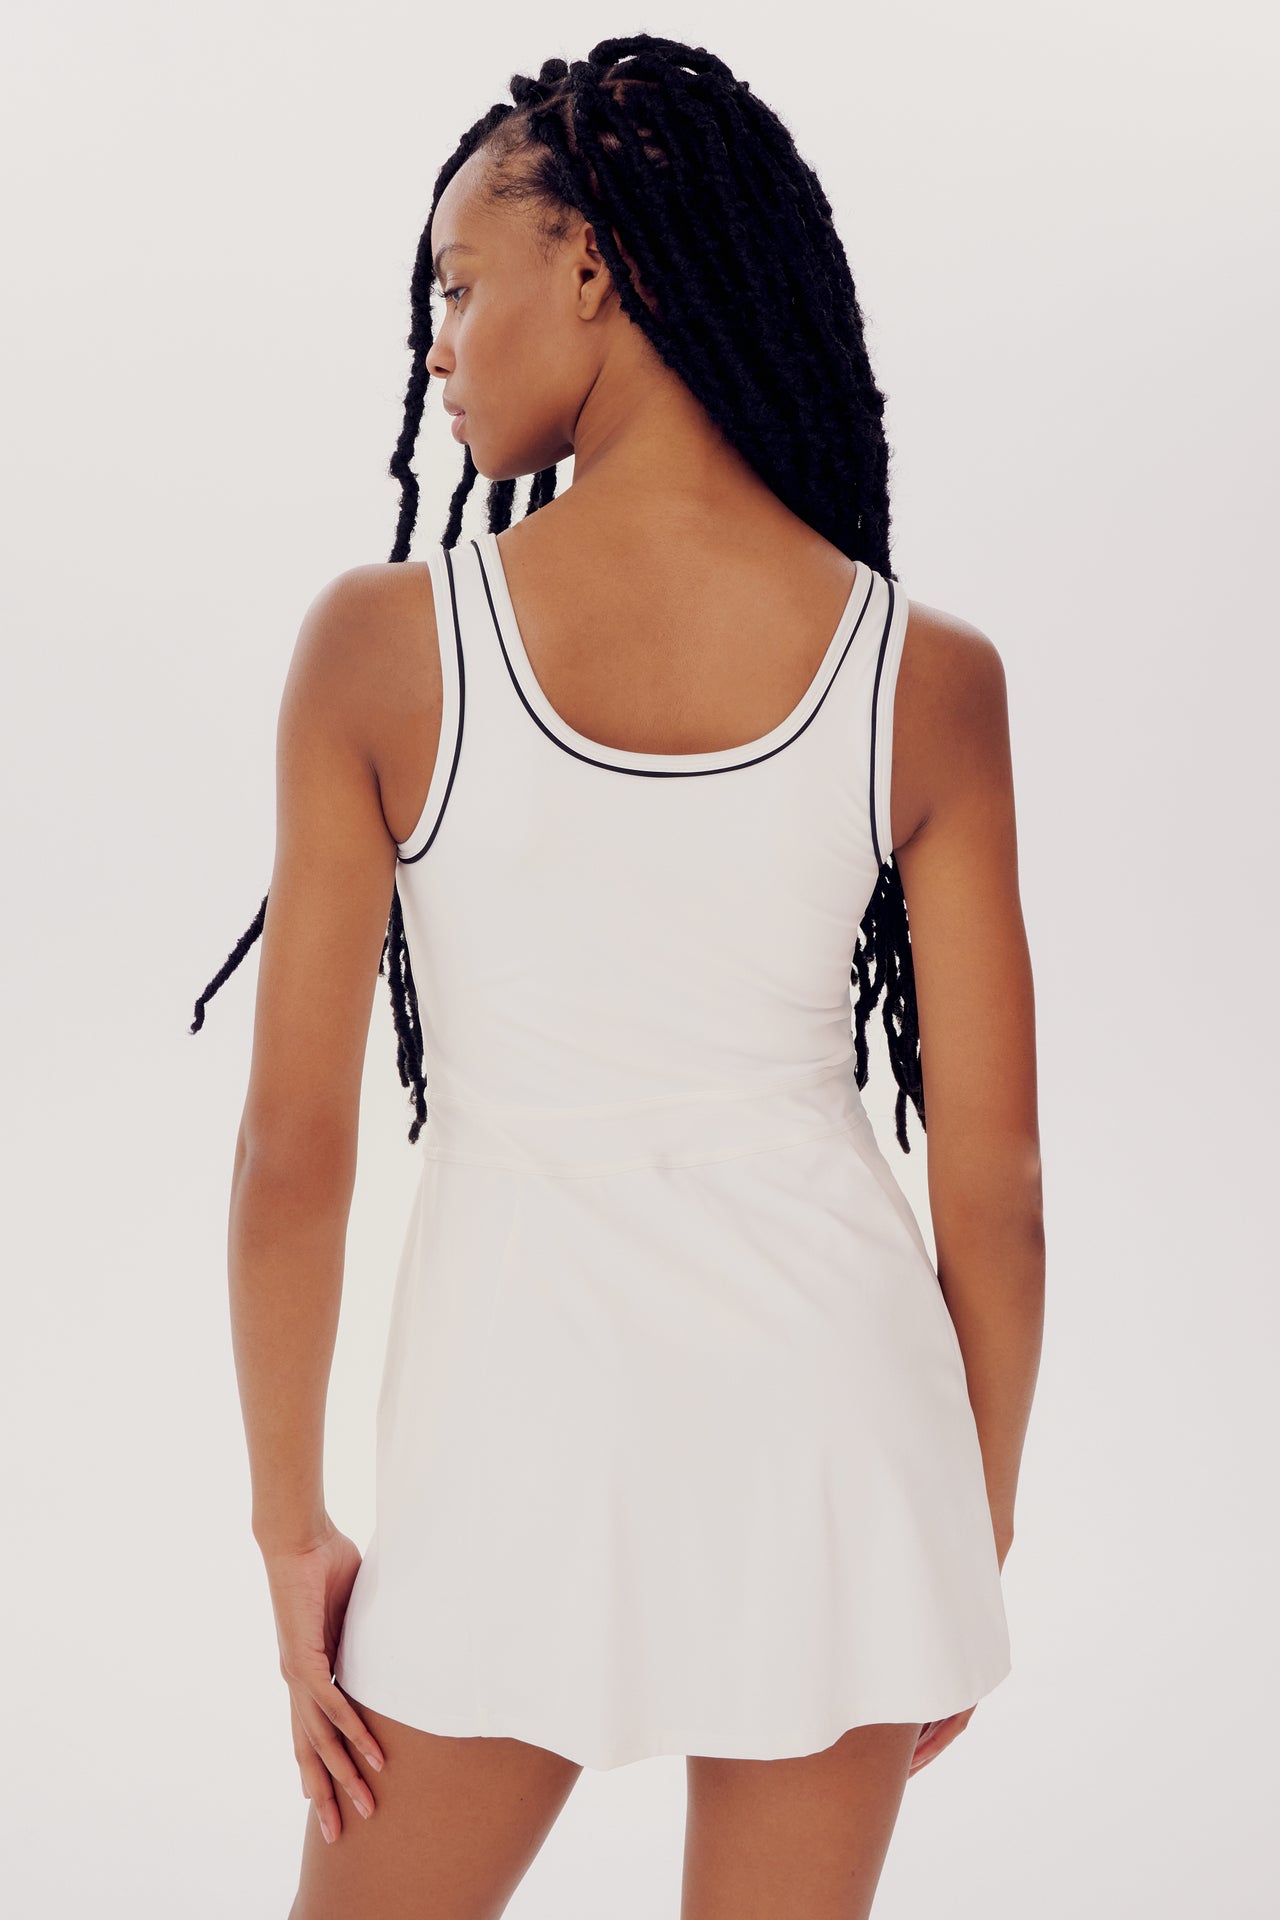 Person with long braided hair wearing a sleeveless white Martina Rigor Dress w/Piping - White by SPLITS59, facing away from the camera.